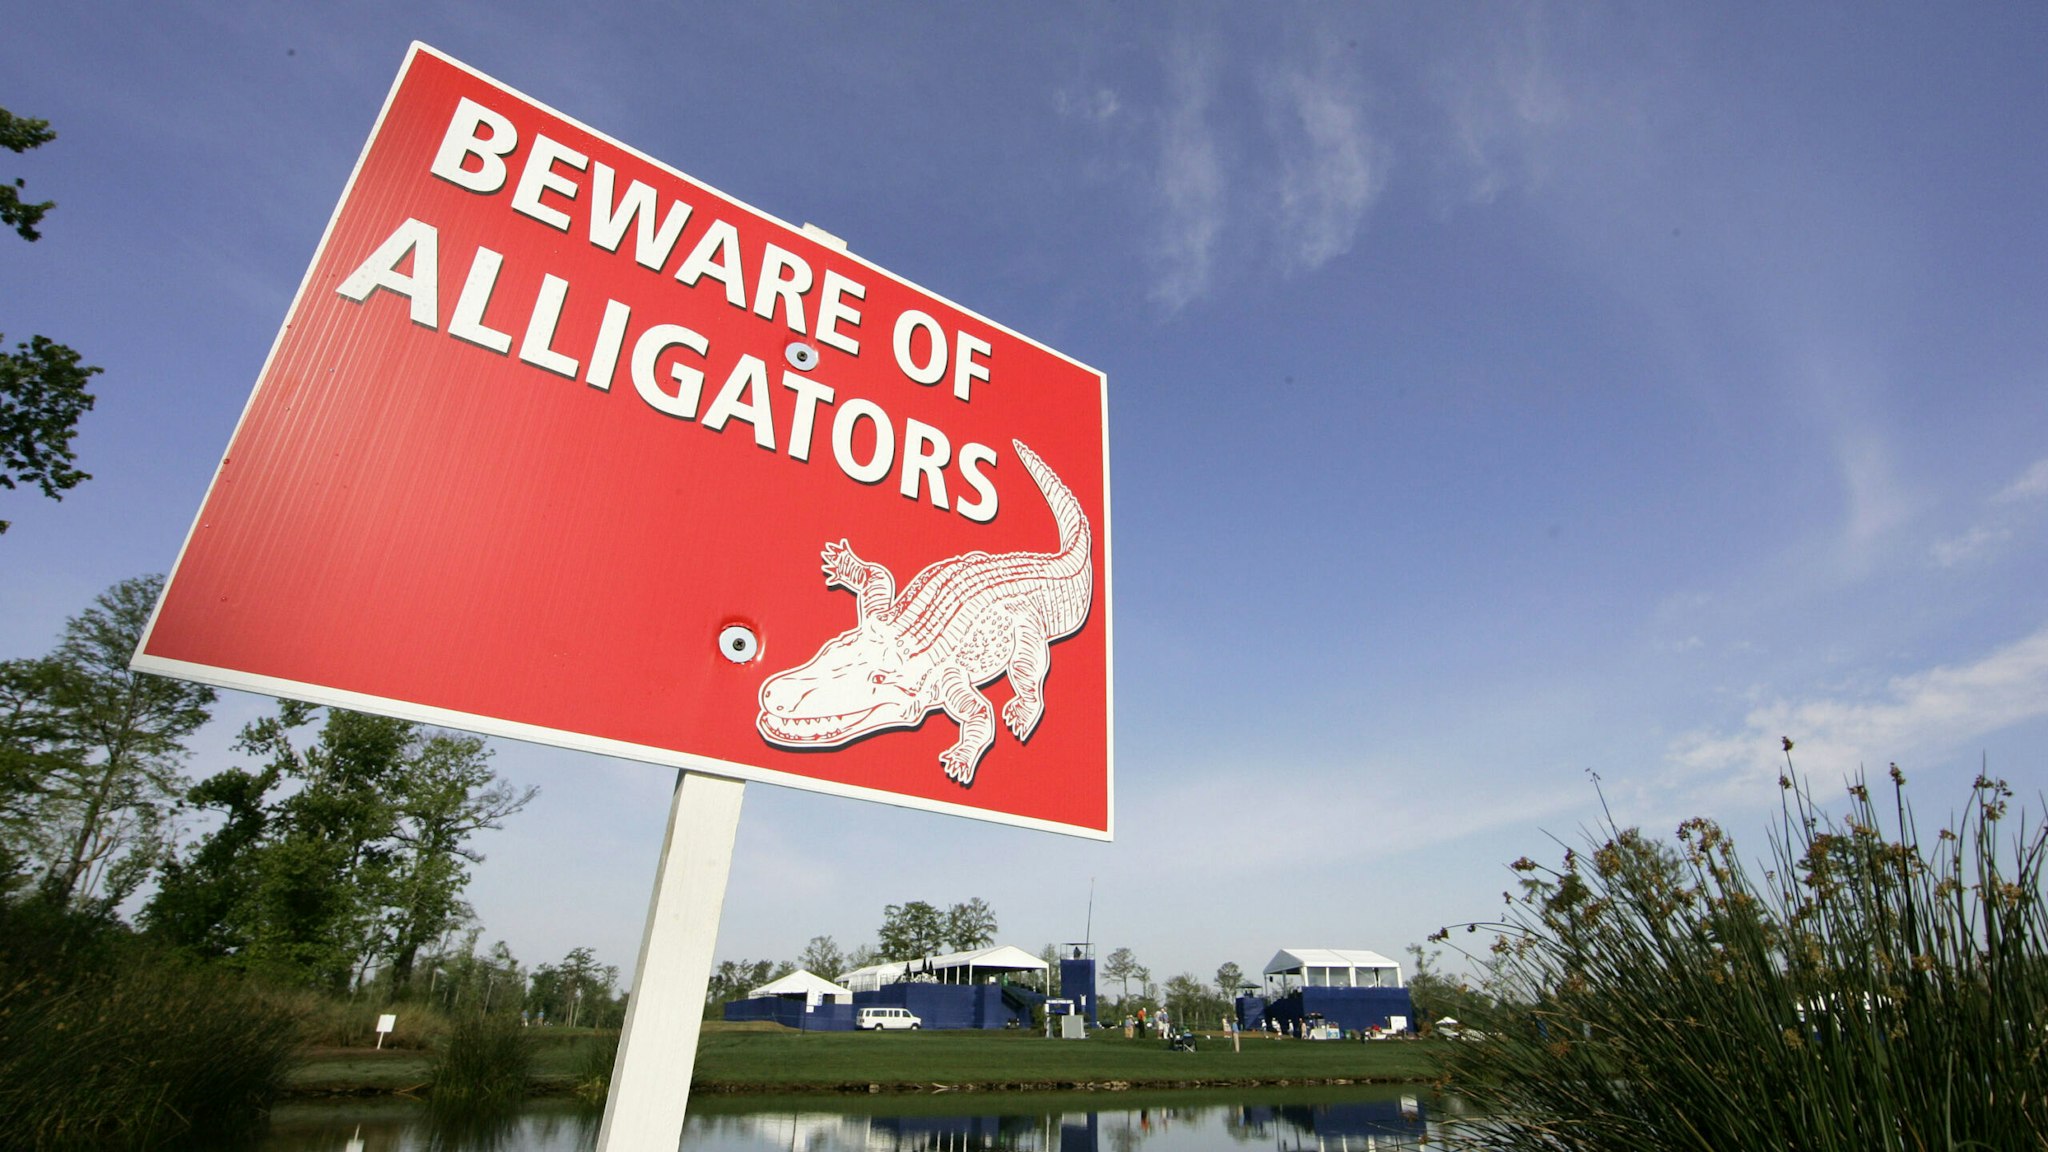 AVONDALE, LA - MARCH 29: A posted sign warns of alligators on the course during the completion of the third round of the Zurich Classic of New Orleans at TPC Louisiana on March 29, 2008 in Avondale, Louisiana.